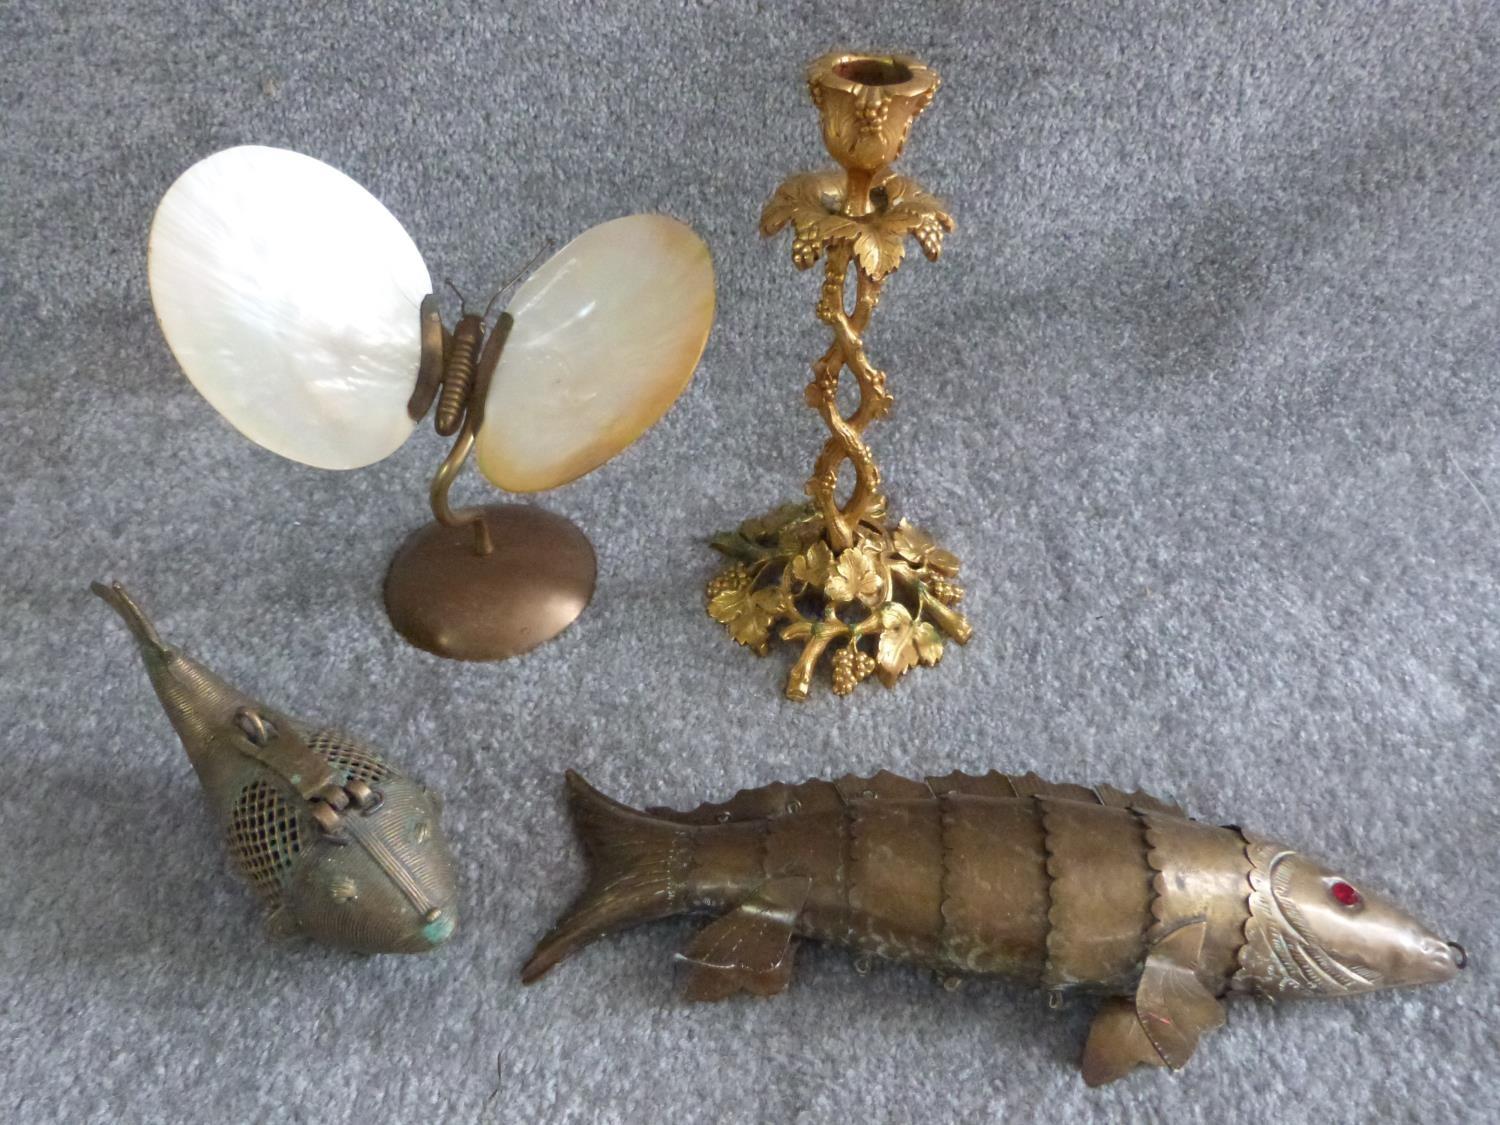 A collection of vintage brass items, including a brass butterfly with oyster shell wings, an